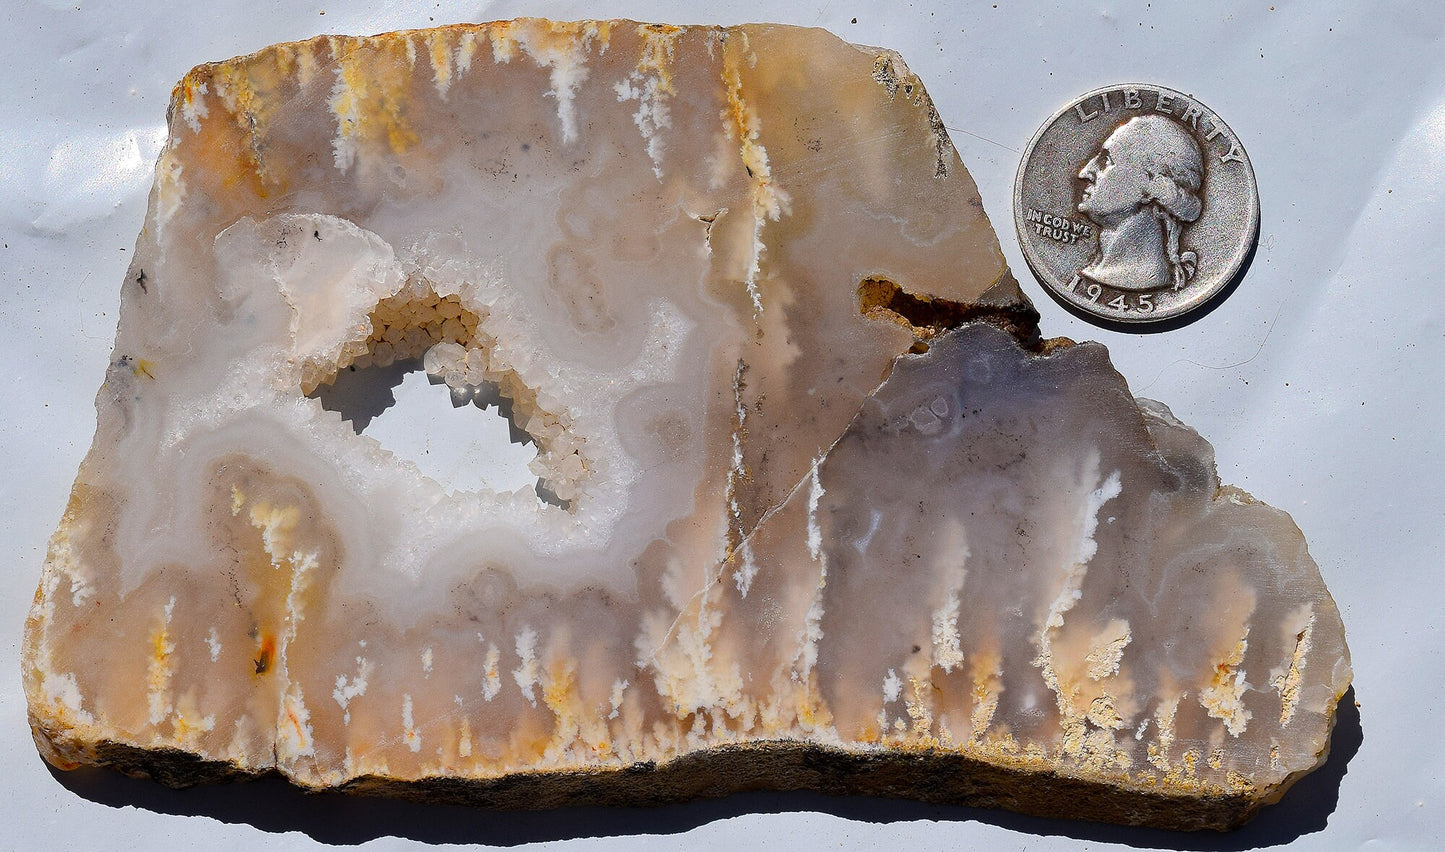 Graveyard Point Plume Agate Group # 2